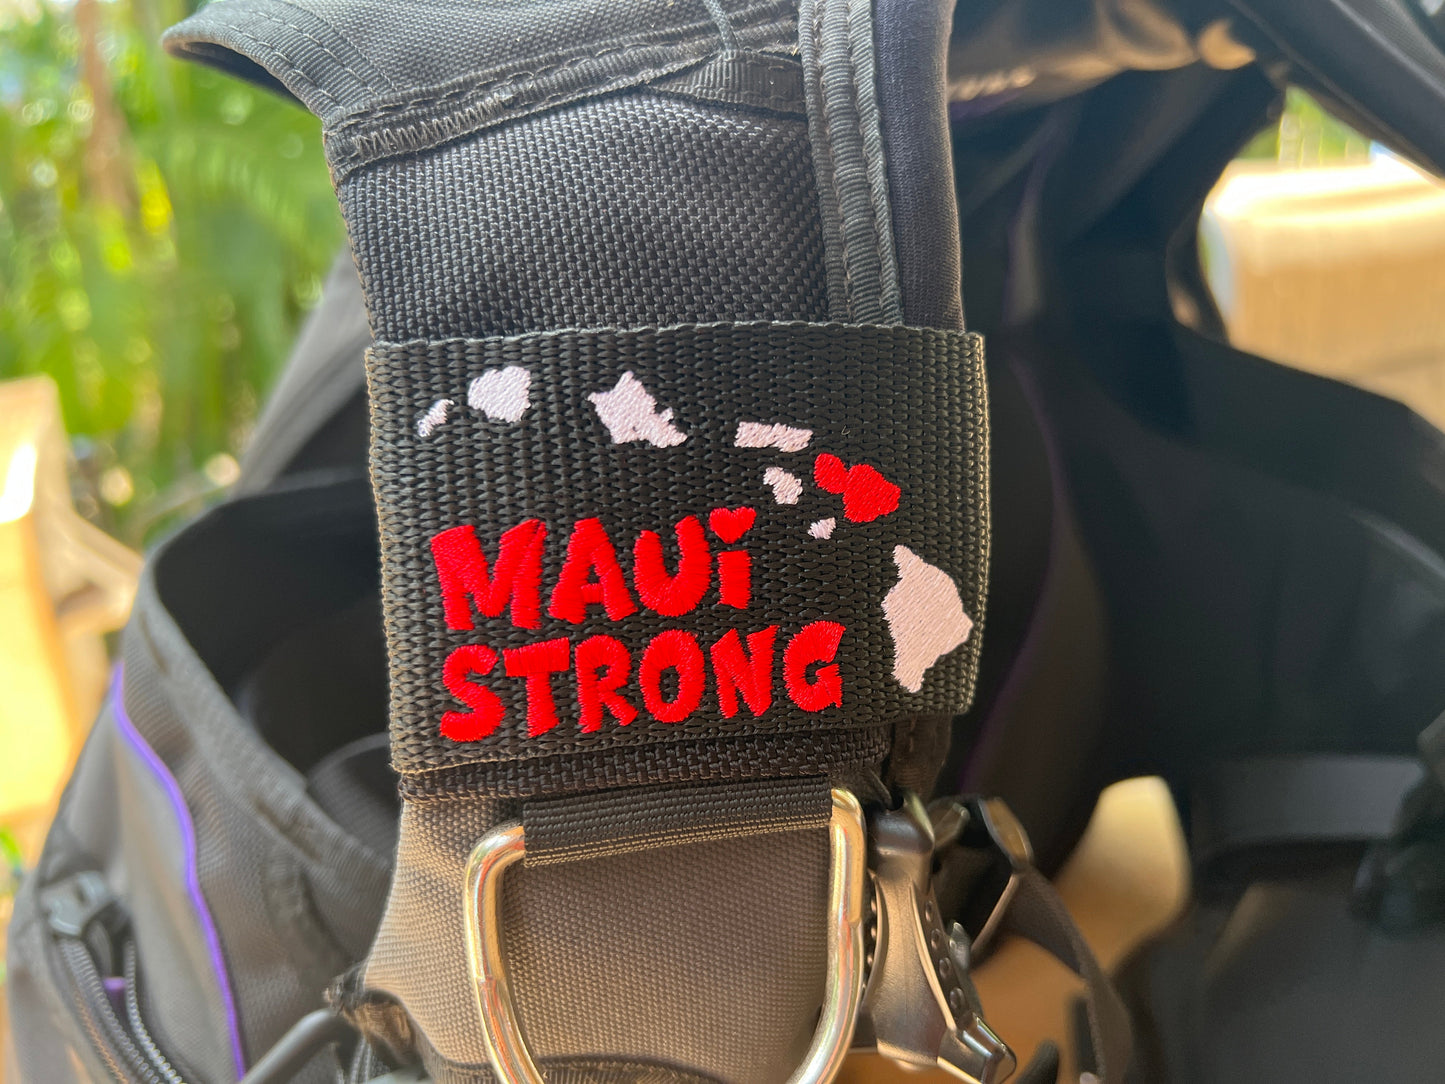 Maui Strong BCD Tag, Support Maui Wildfire Victims and their pets. 100% proceeds go to Local Maui Charities, Lahaina Strong